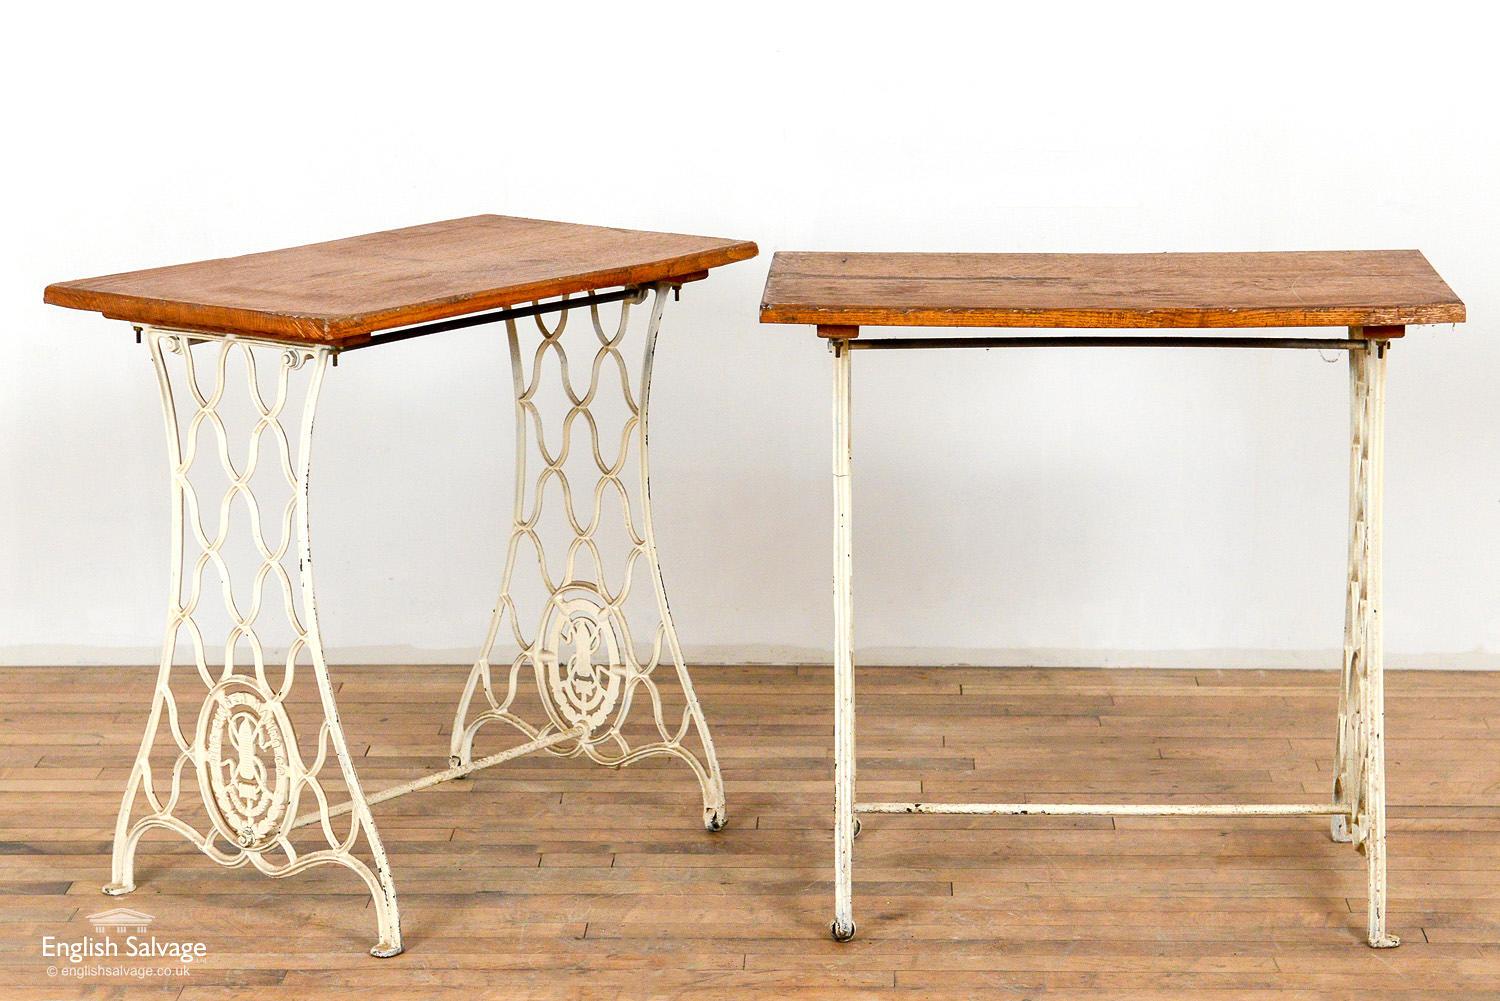 White painted metal and wood tables made from singer bases. Scrapes and scuffs commensurate with age. One base has a small crack to the metalwork.